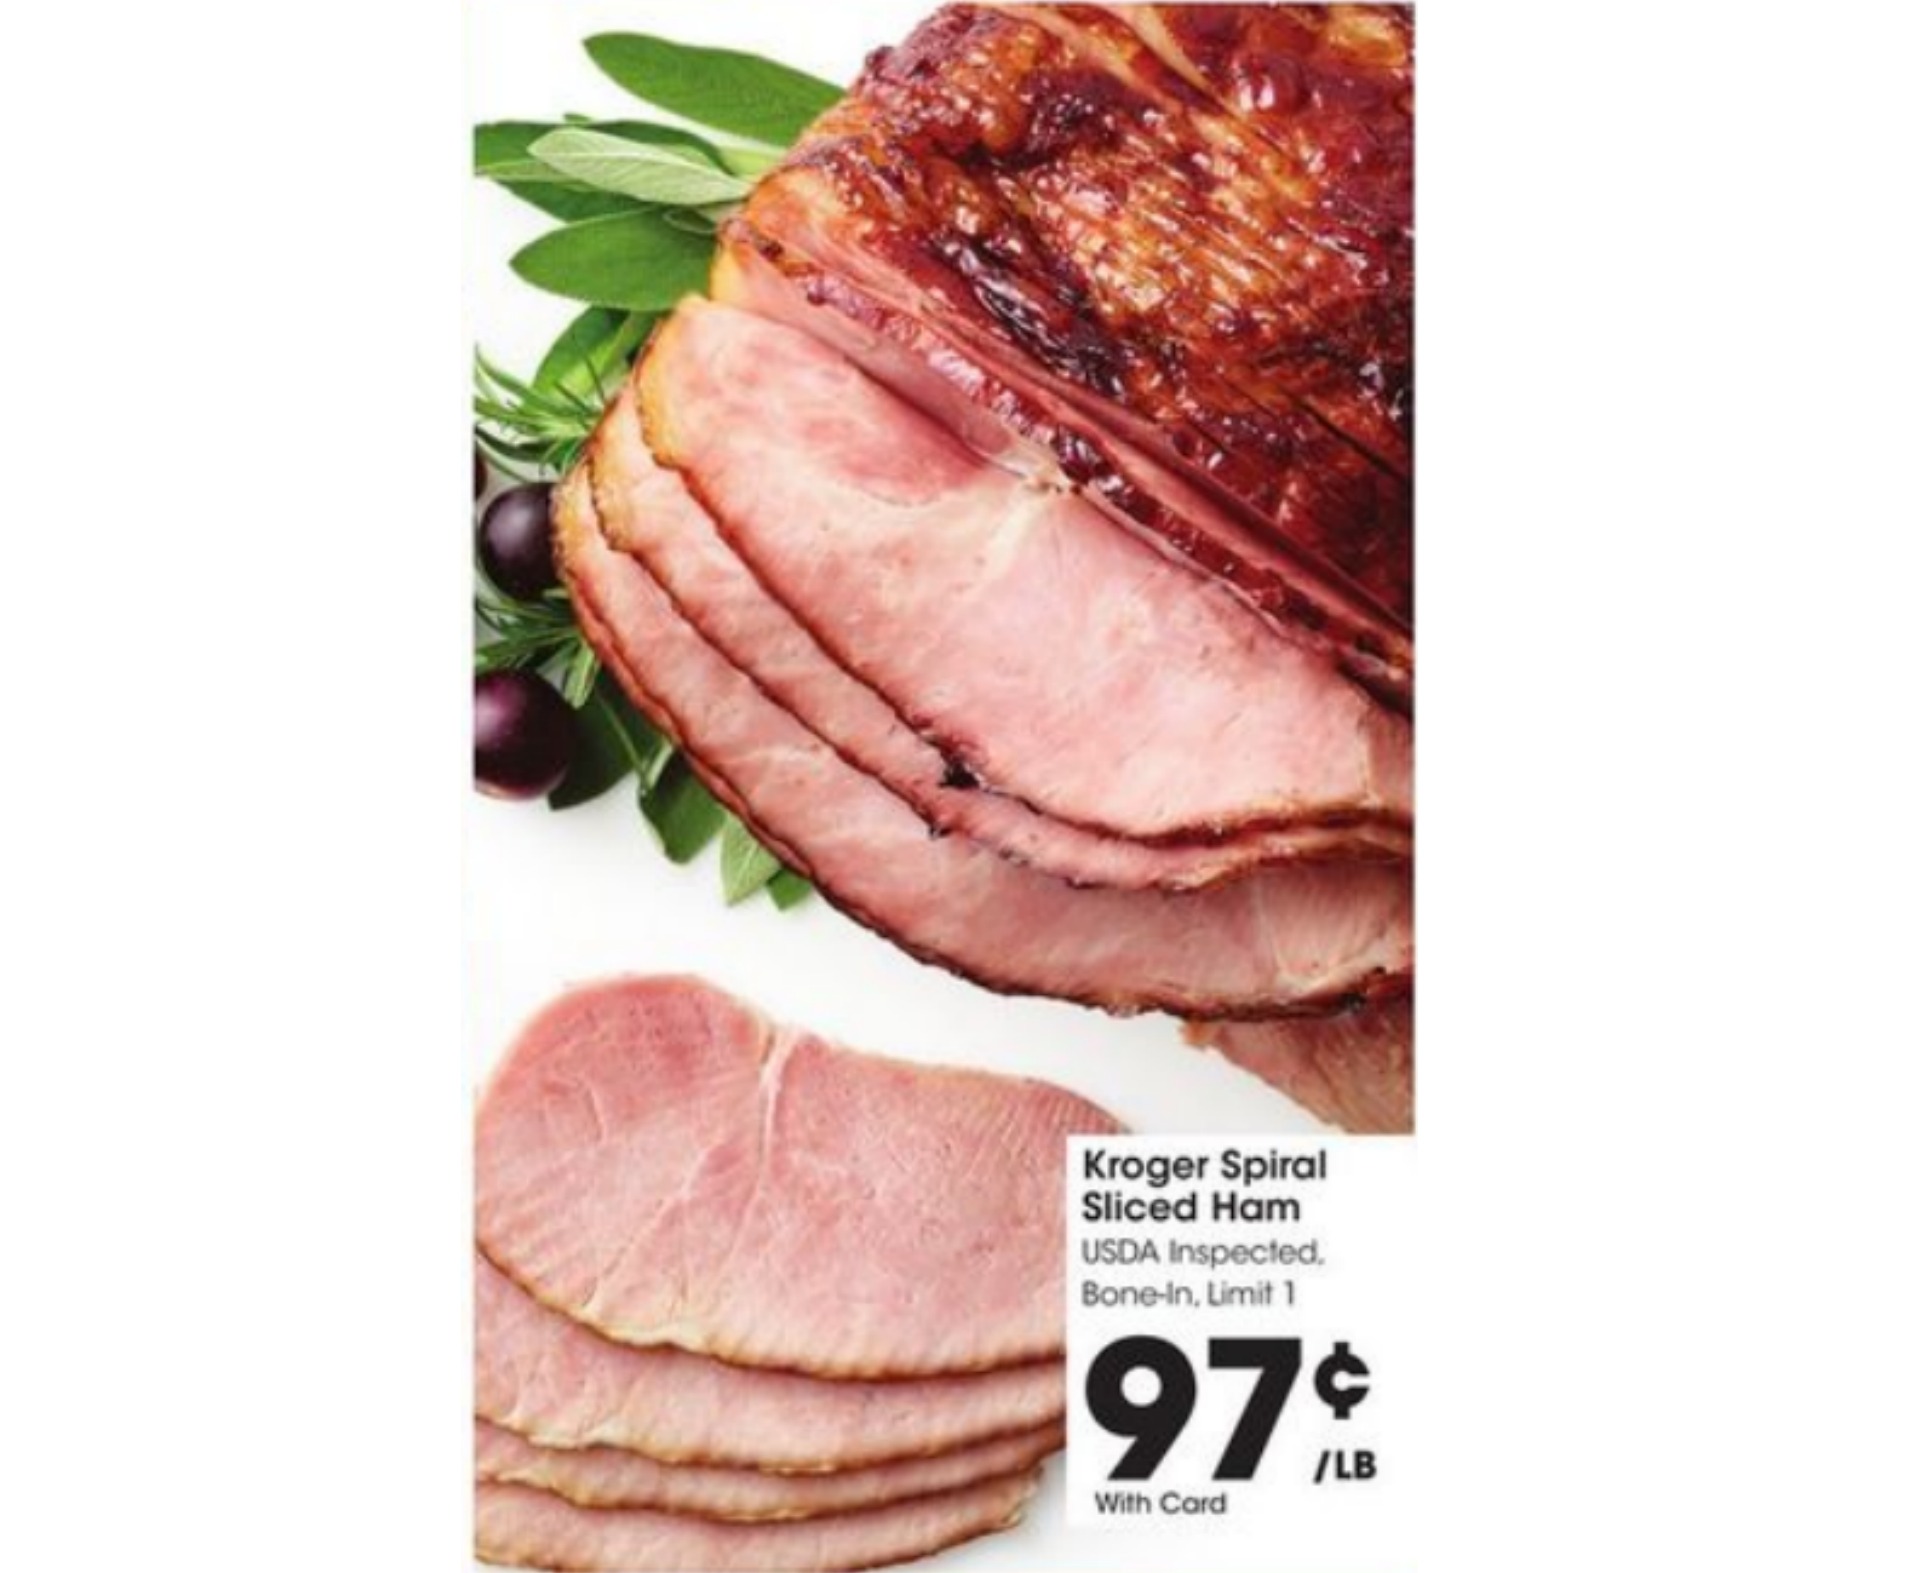 Easter Ham Sales at Kroger! You Can NOW Add To Your Kroger Pickup Order